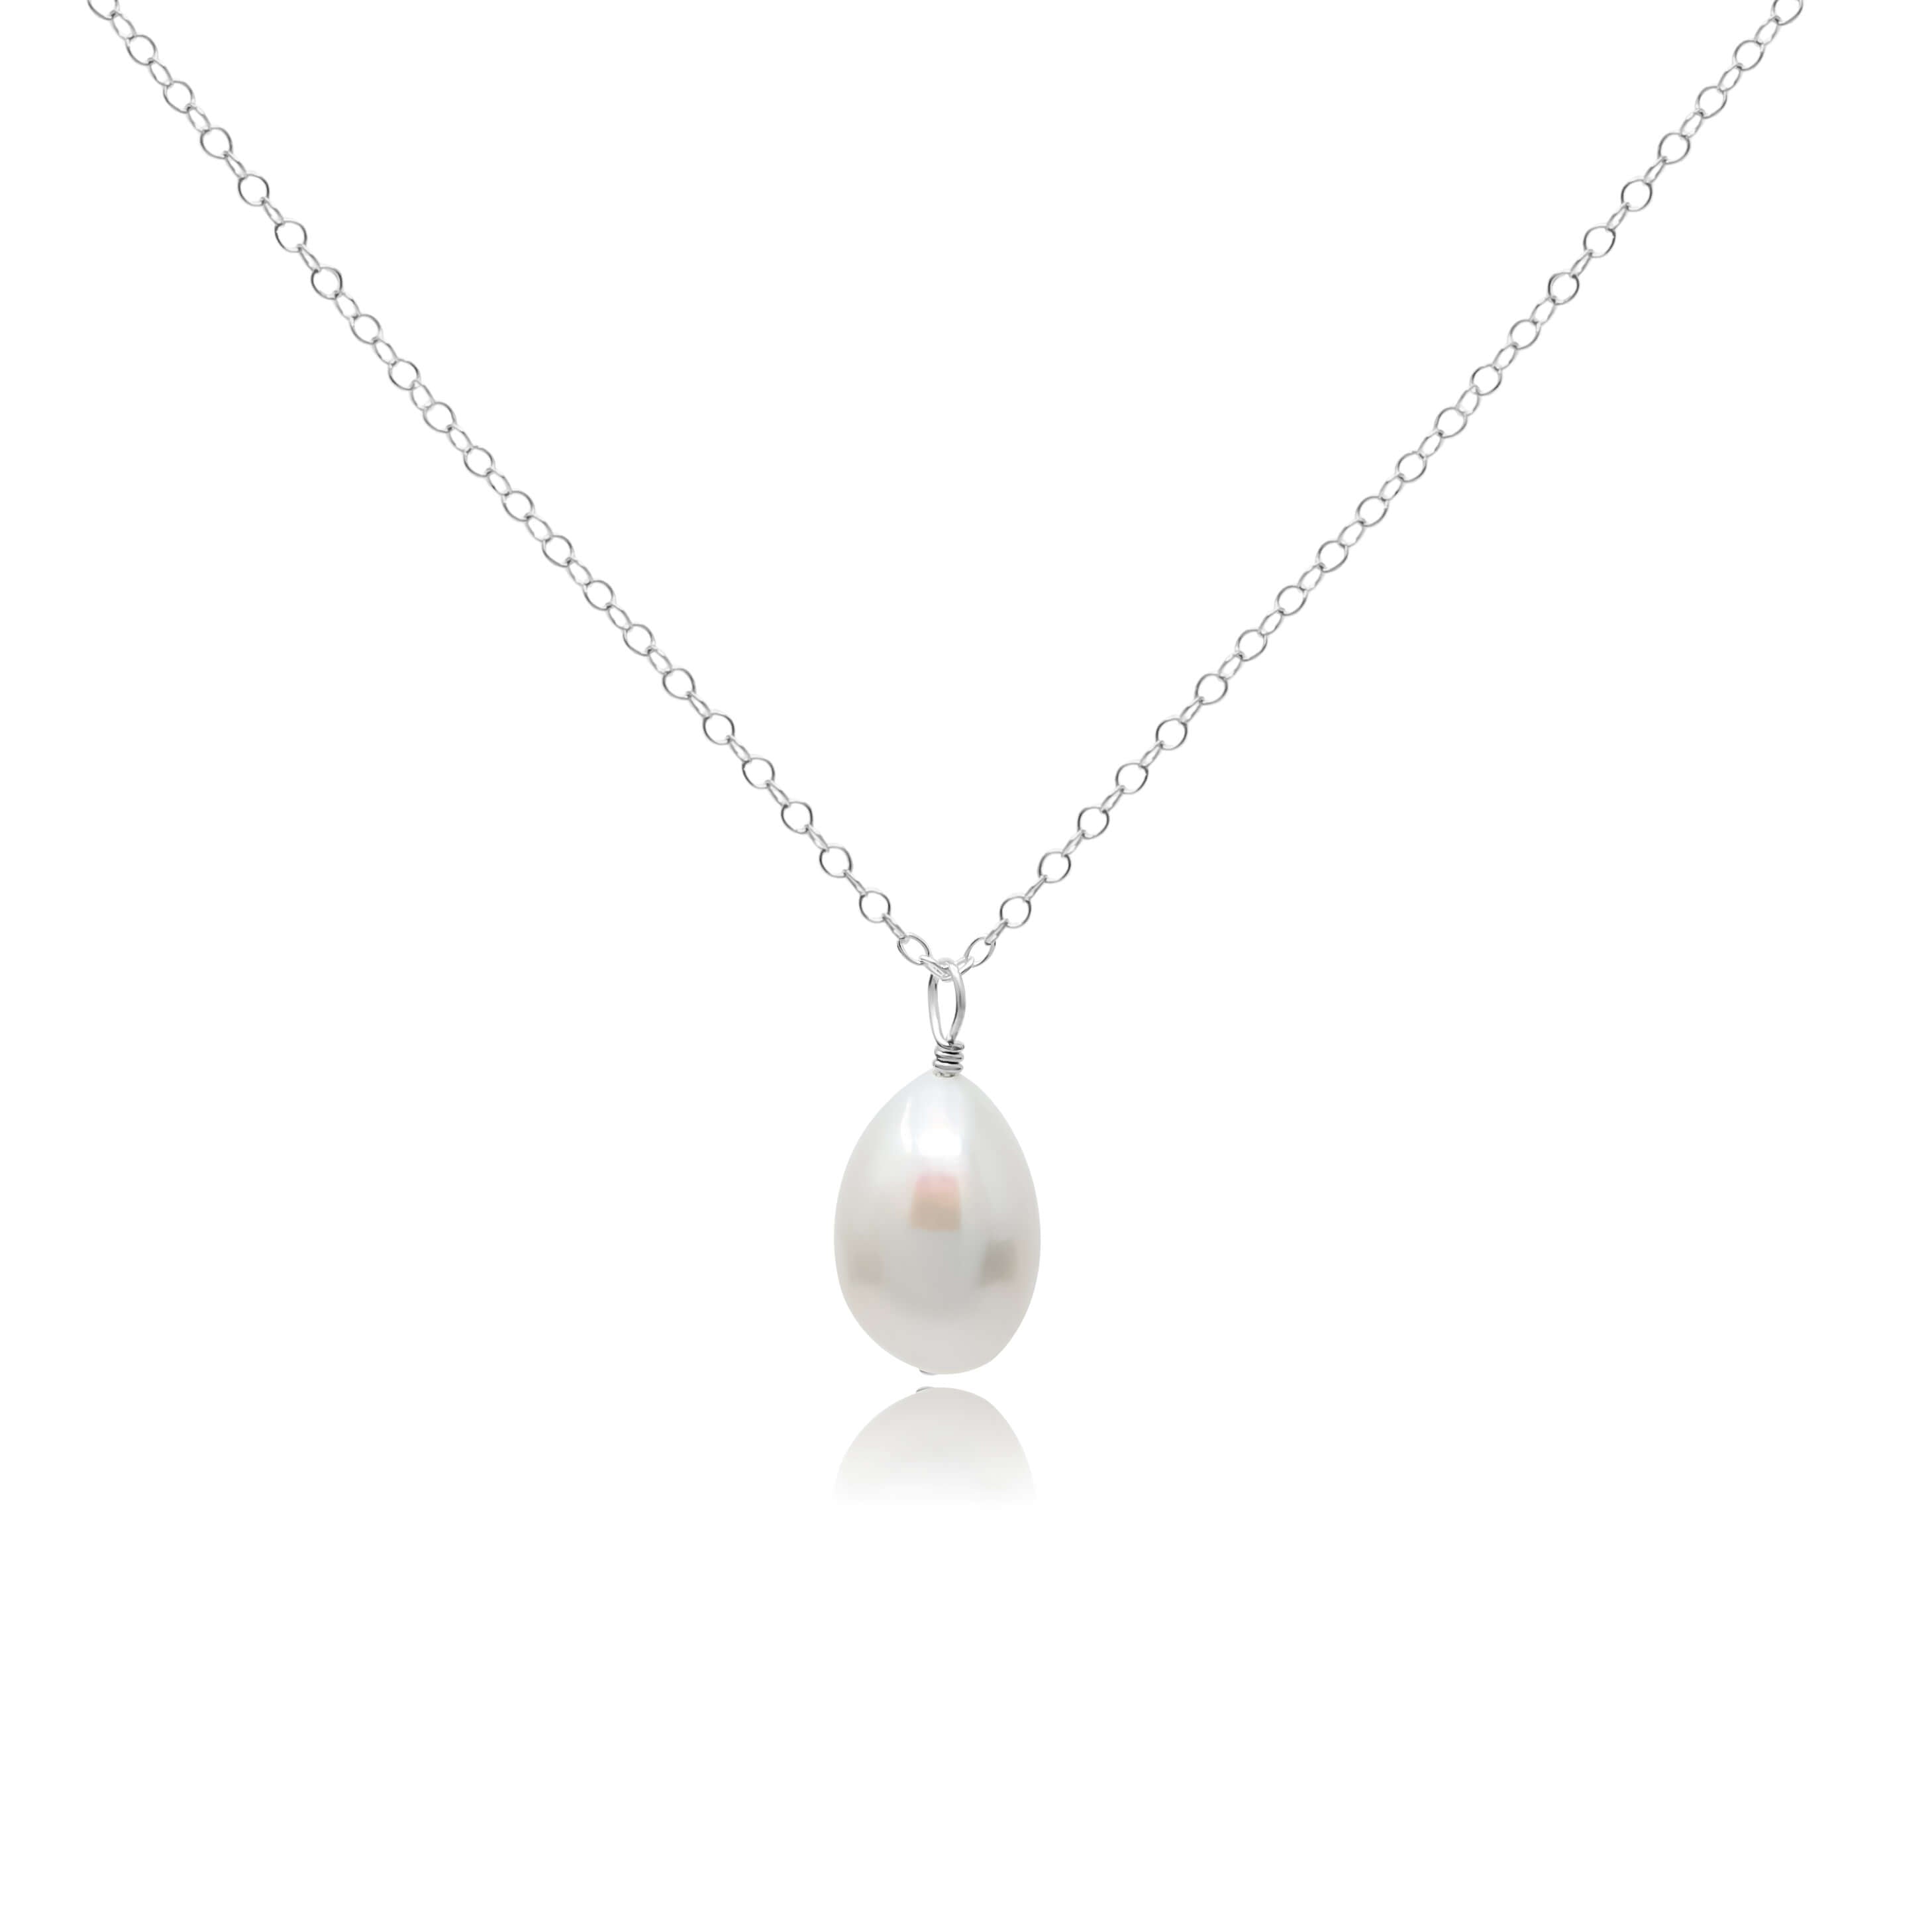 Baroque pearl pendant hanging on sterling silver chain necklace